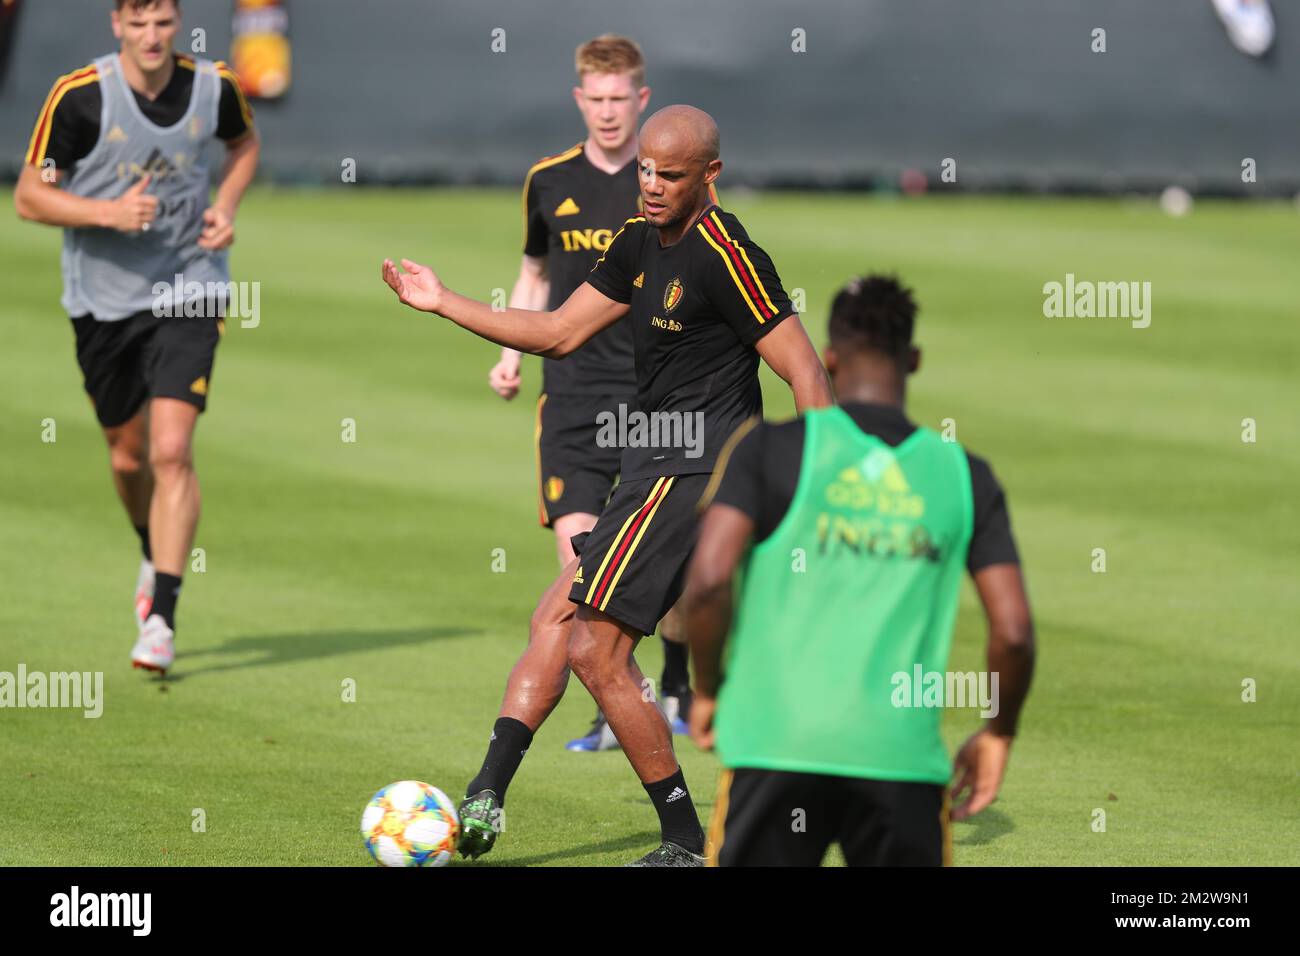 Belgium's Kevin De Bruyne and Belgium's Vincent Kompany pictured during a training session of Belgian national soccer team the Red Devils, Tuesday 04 June 2019. The team will be playing two European Cup 2020 qualification games against Kazachstan and Scotland in Belgium. BELGA PHOTO BRUNO FAHY  Stock Photo